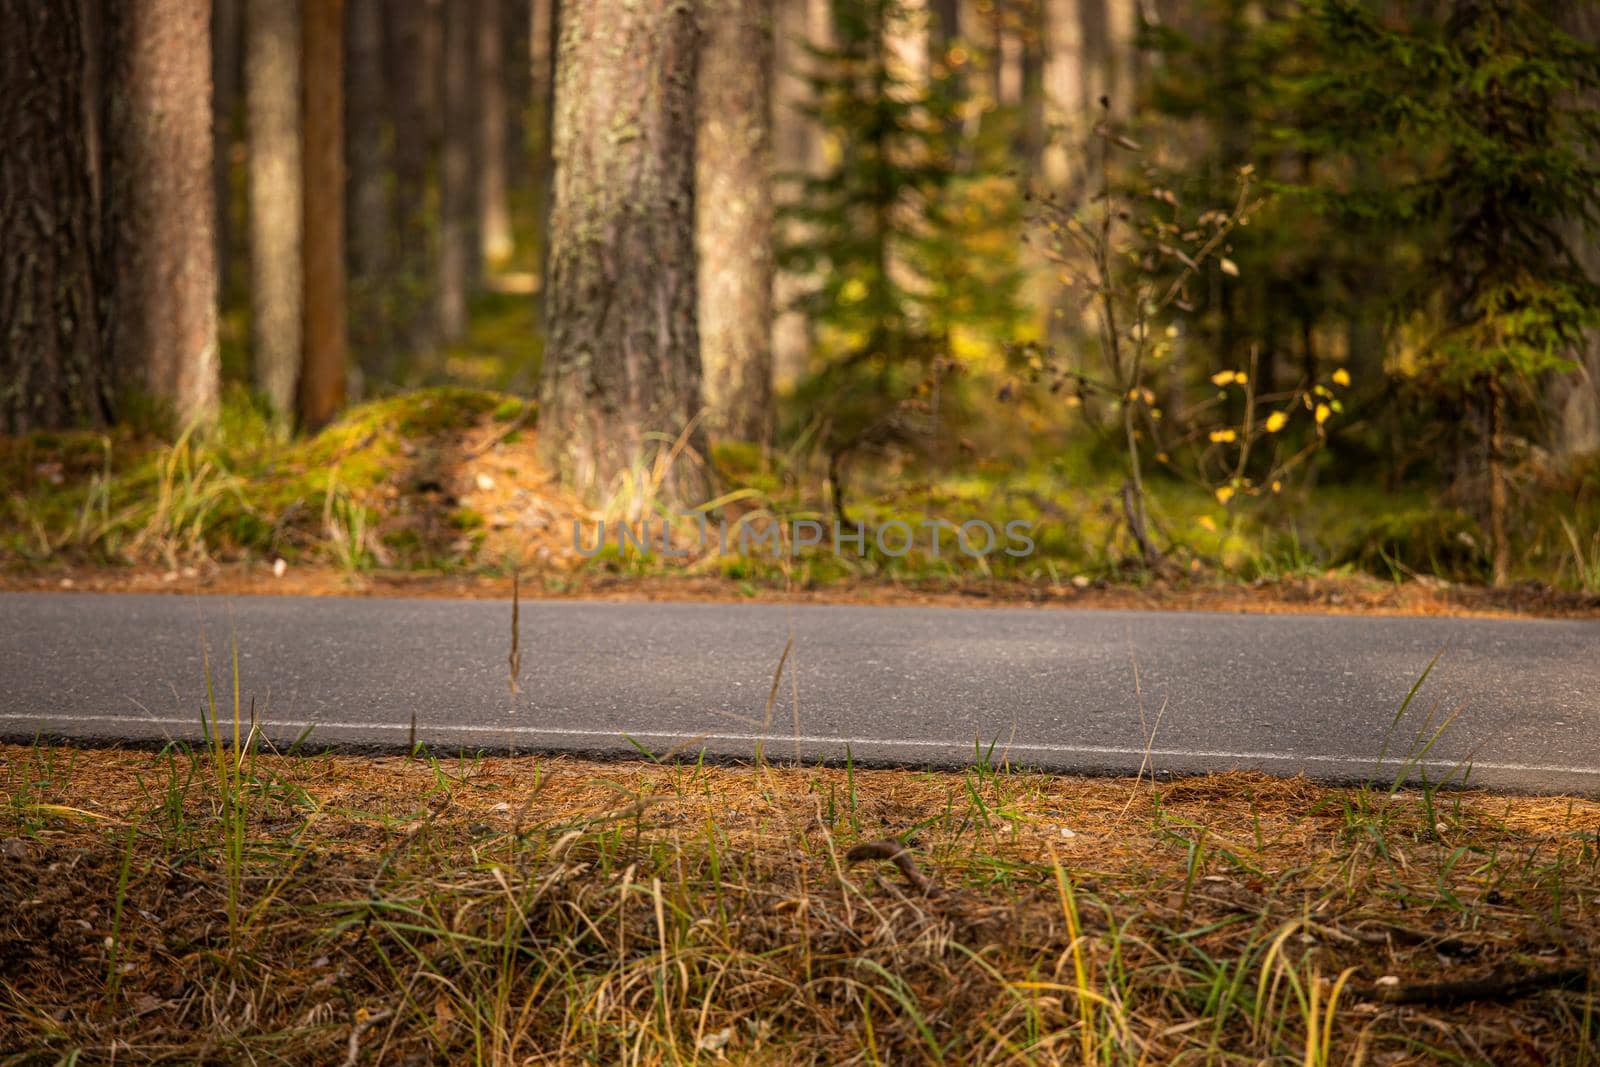 The edge of an asphalt road in a forest in a pine forest in nature. Summer green forest around.